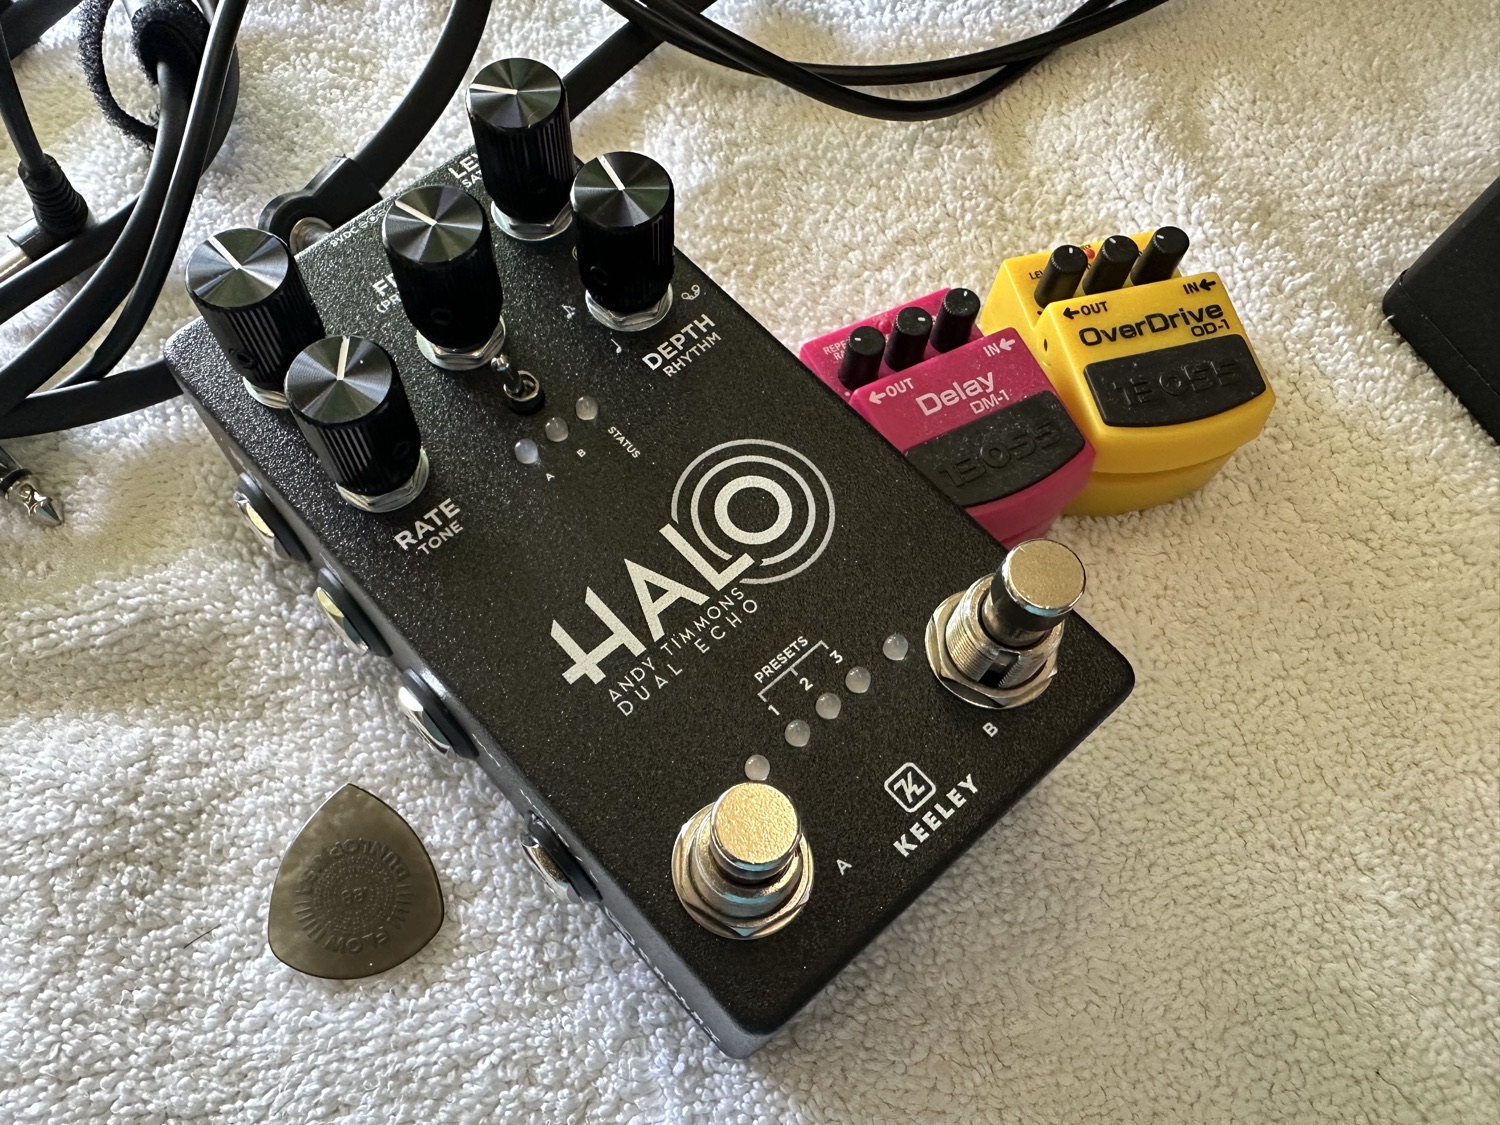 The Keeley Halo guitar delay/echo effects pedal